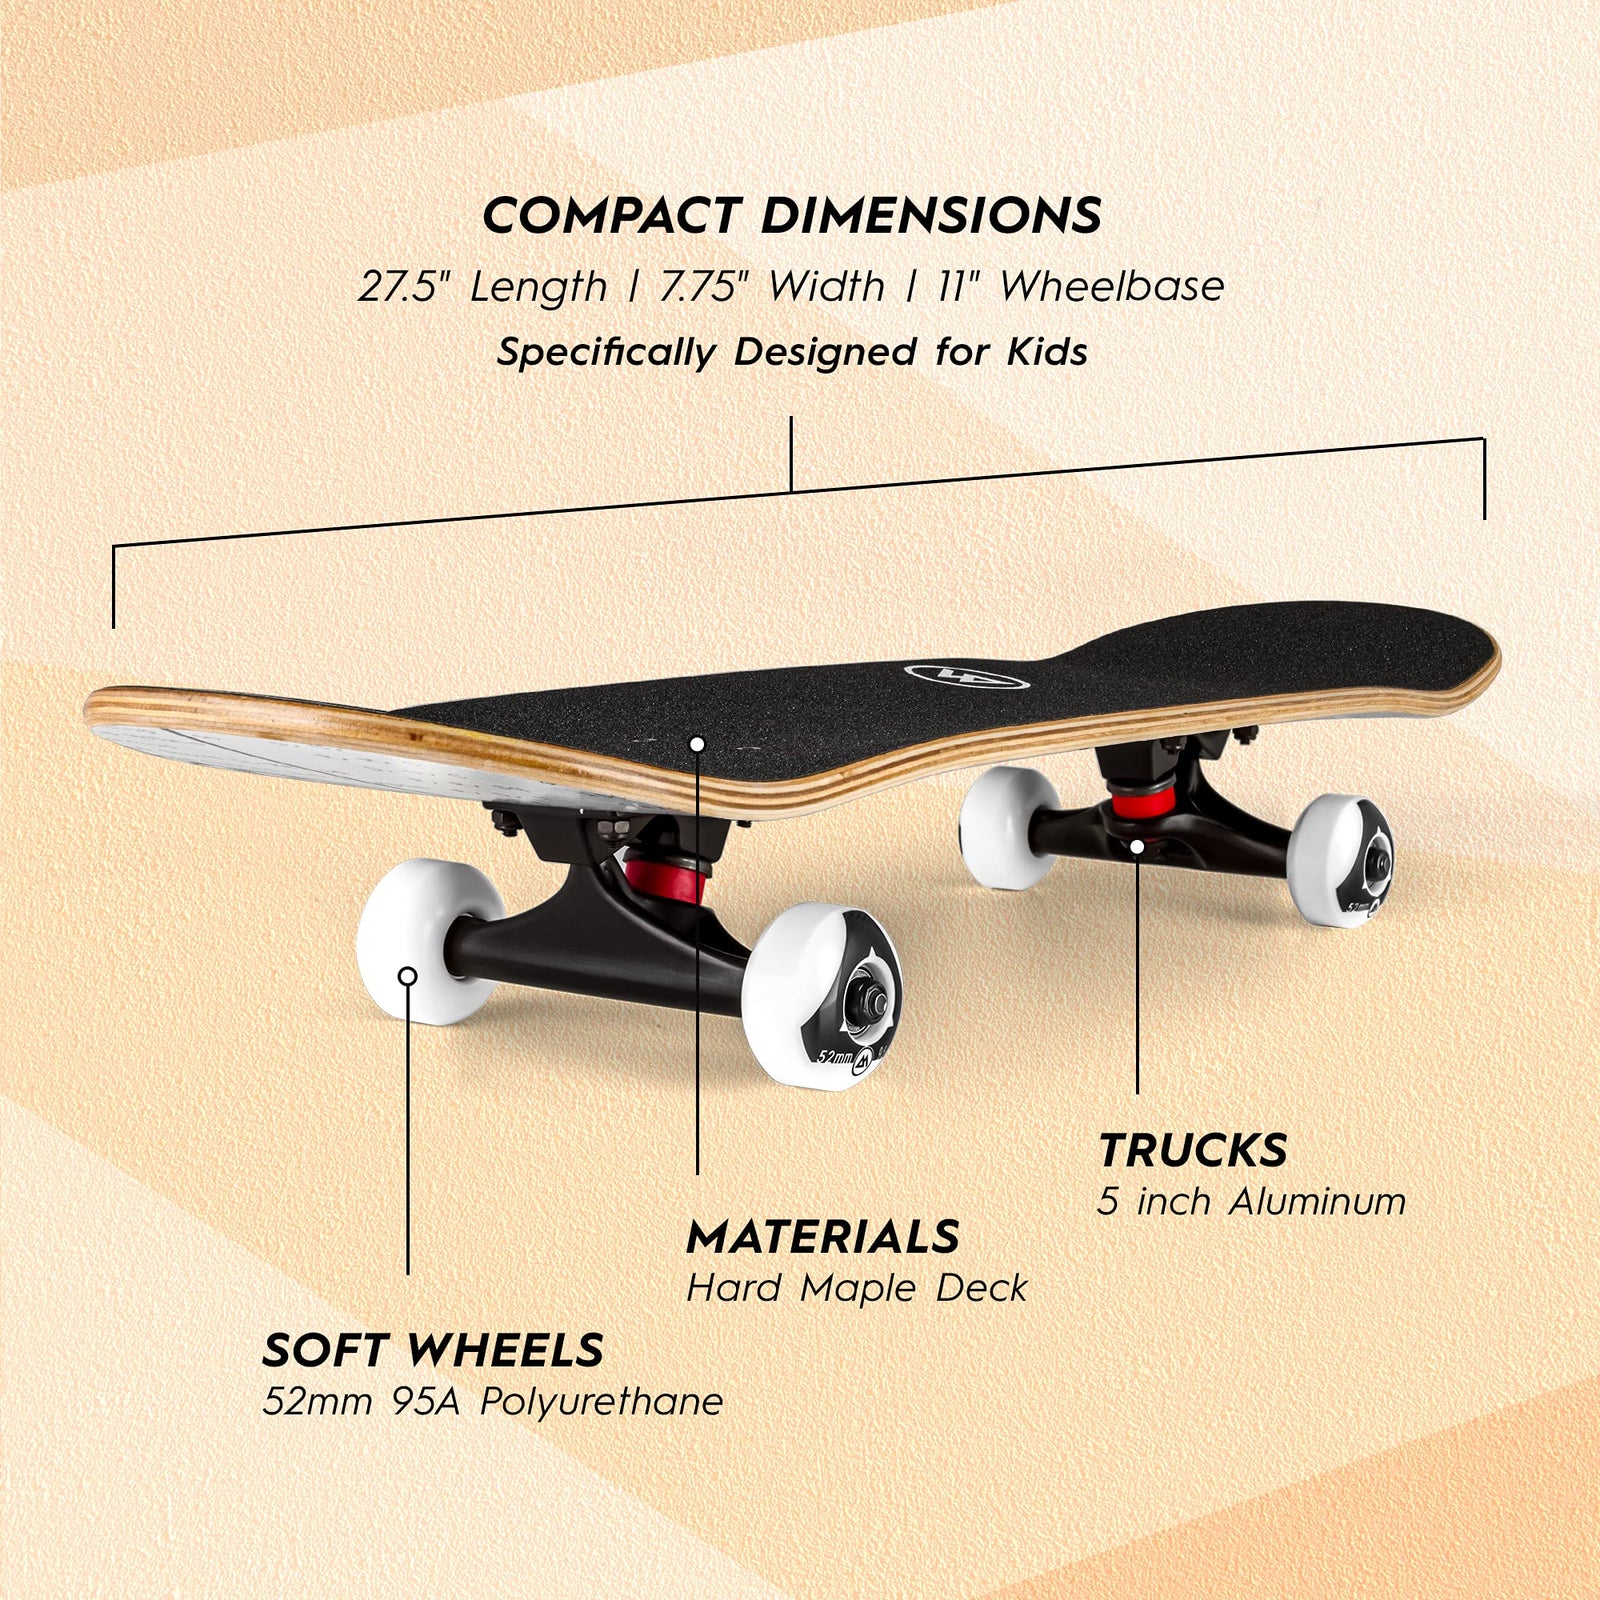 Magneto Kids Complete Skateboard | 27.7” x 7.75” | Maple Deck Components and Grip Tape | Full Assembled | Designed for Kids Teens Youth Boys Girls | Great First Board